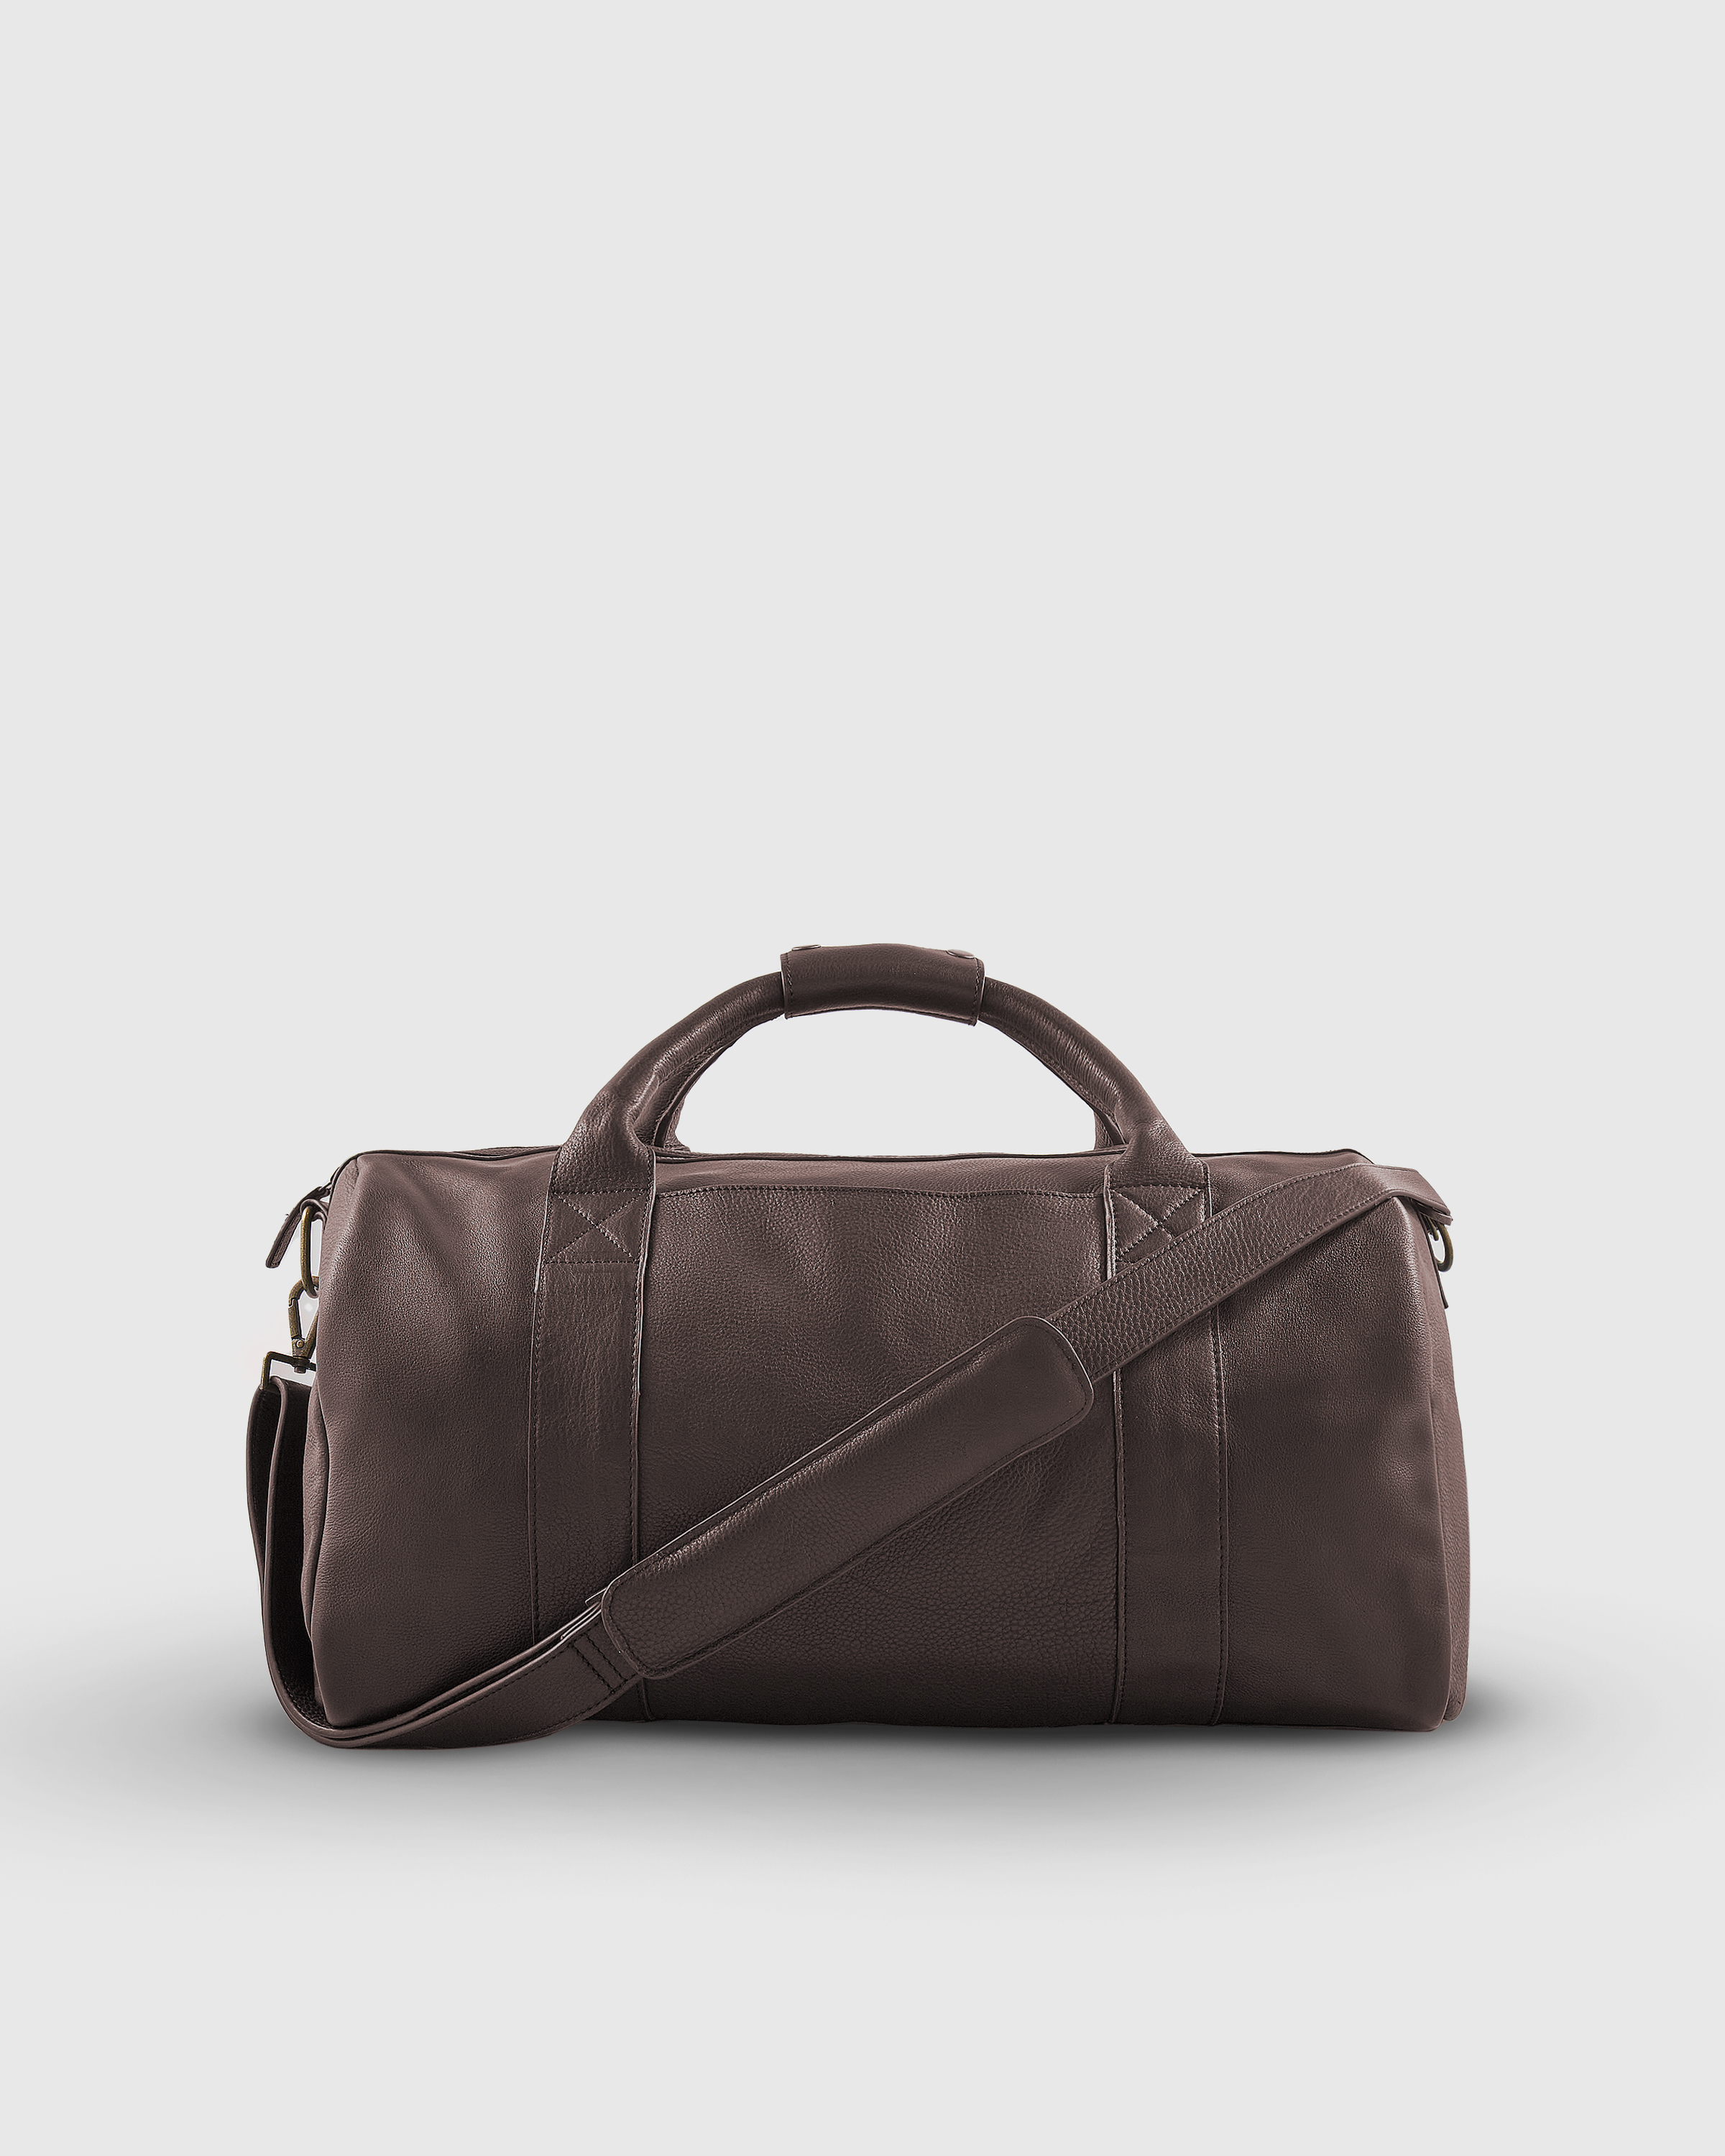 Quince Men's Nappa Leather Duffle Bag In Brown